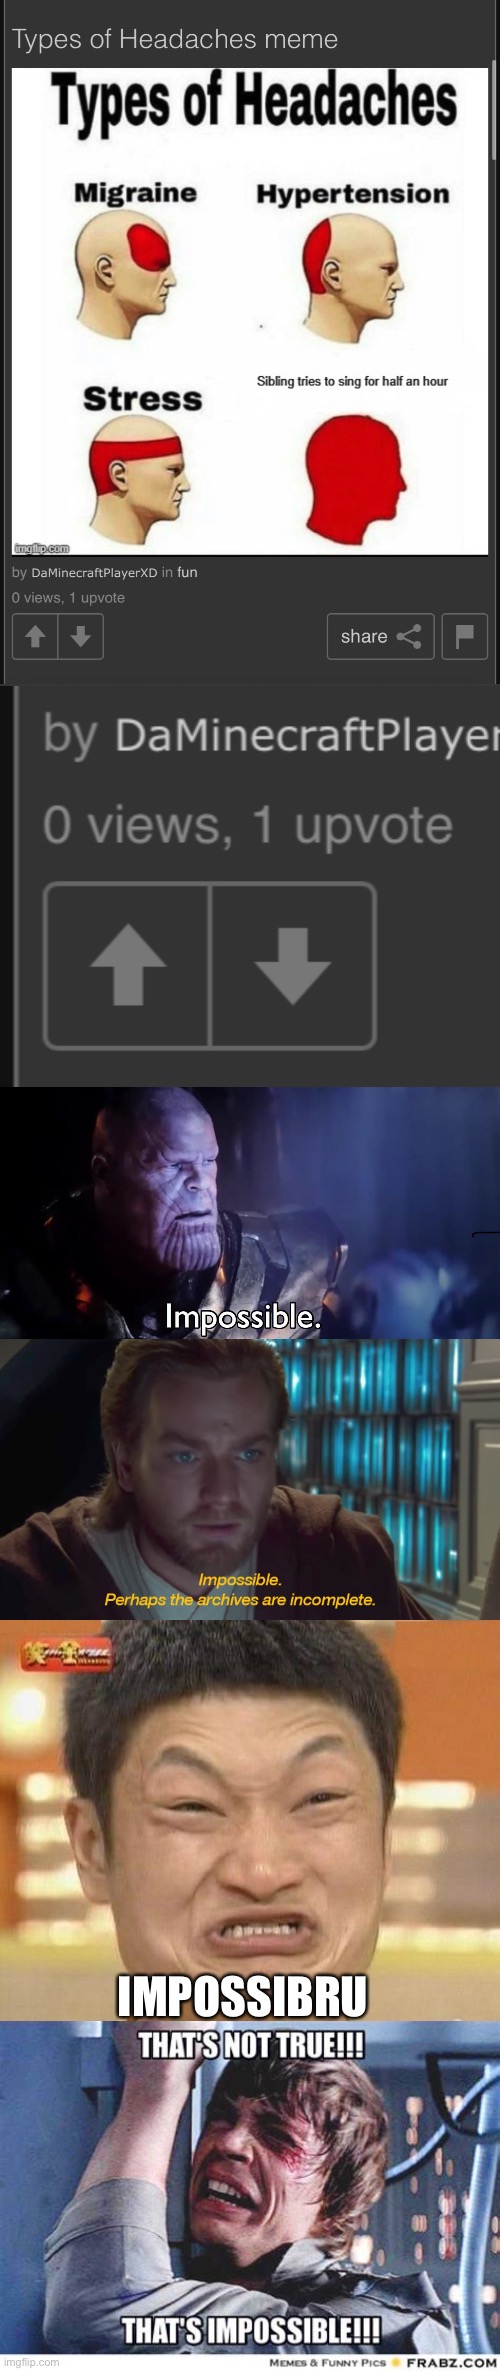 Impossible | IMPOSSIBRU | image tagged in thanos impossible,star wars prequel obi-wan archives are incomplete,memes,impossibru guy original | made w/ Imgflip meme maker